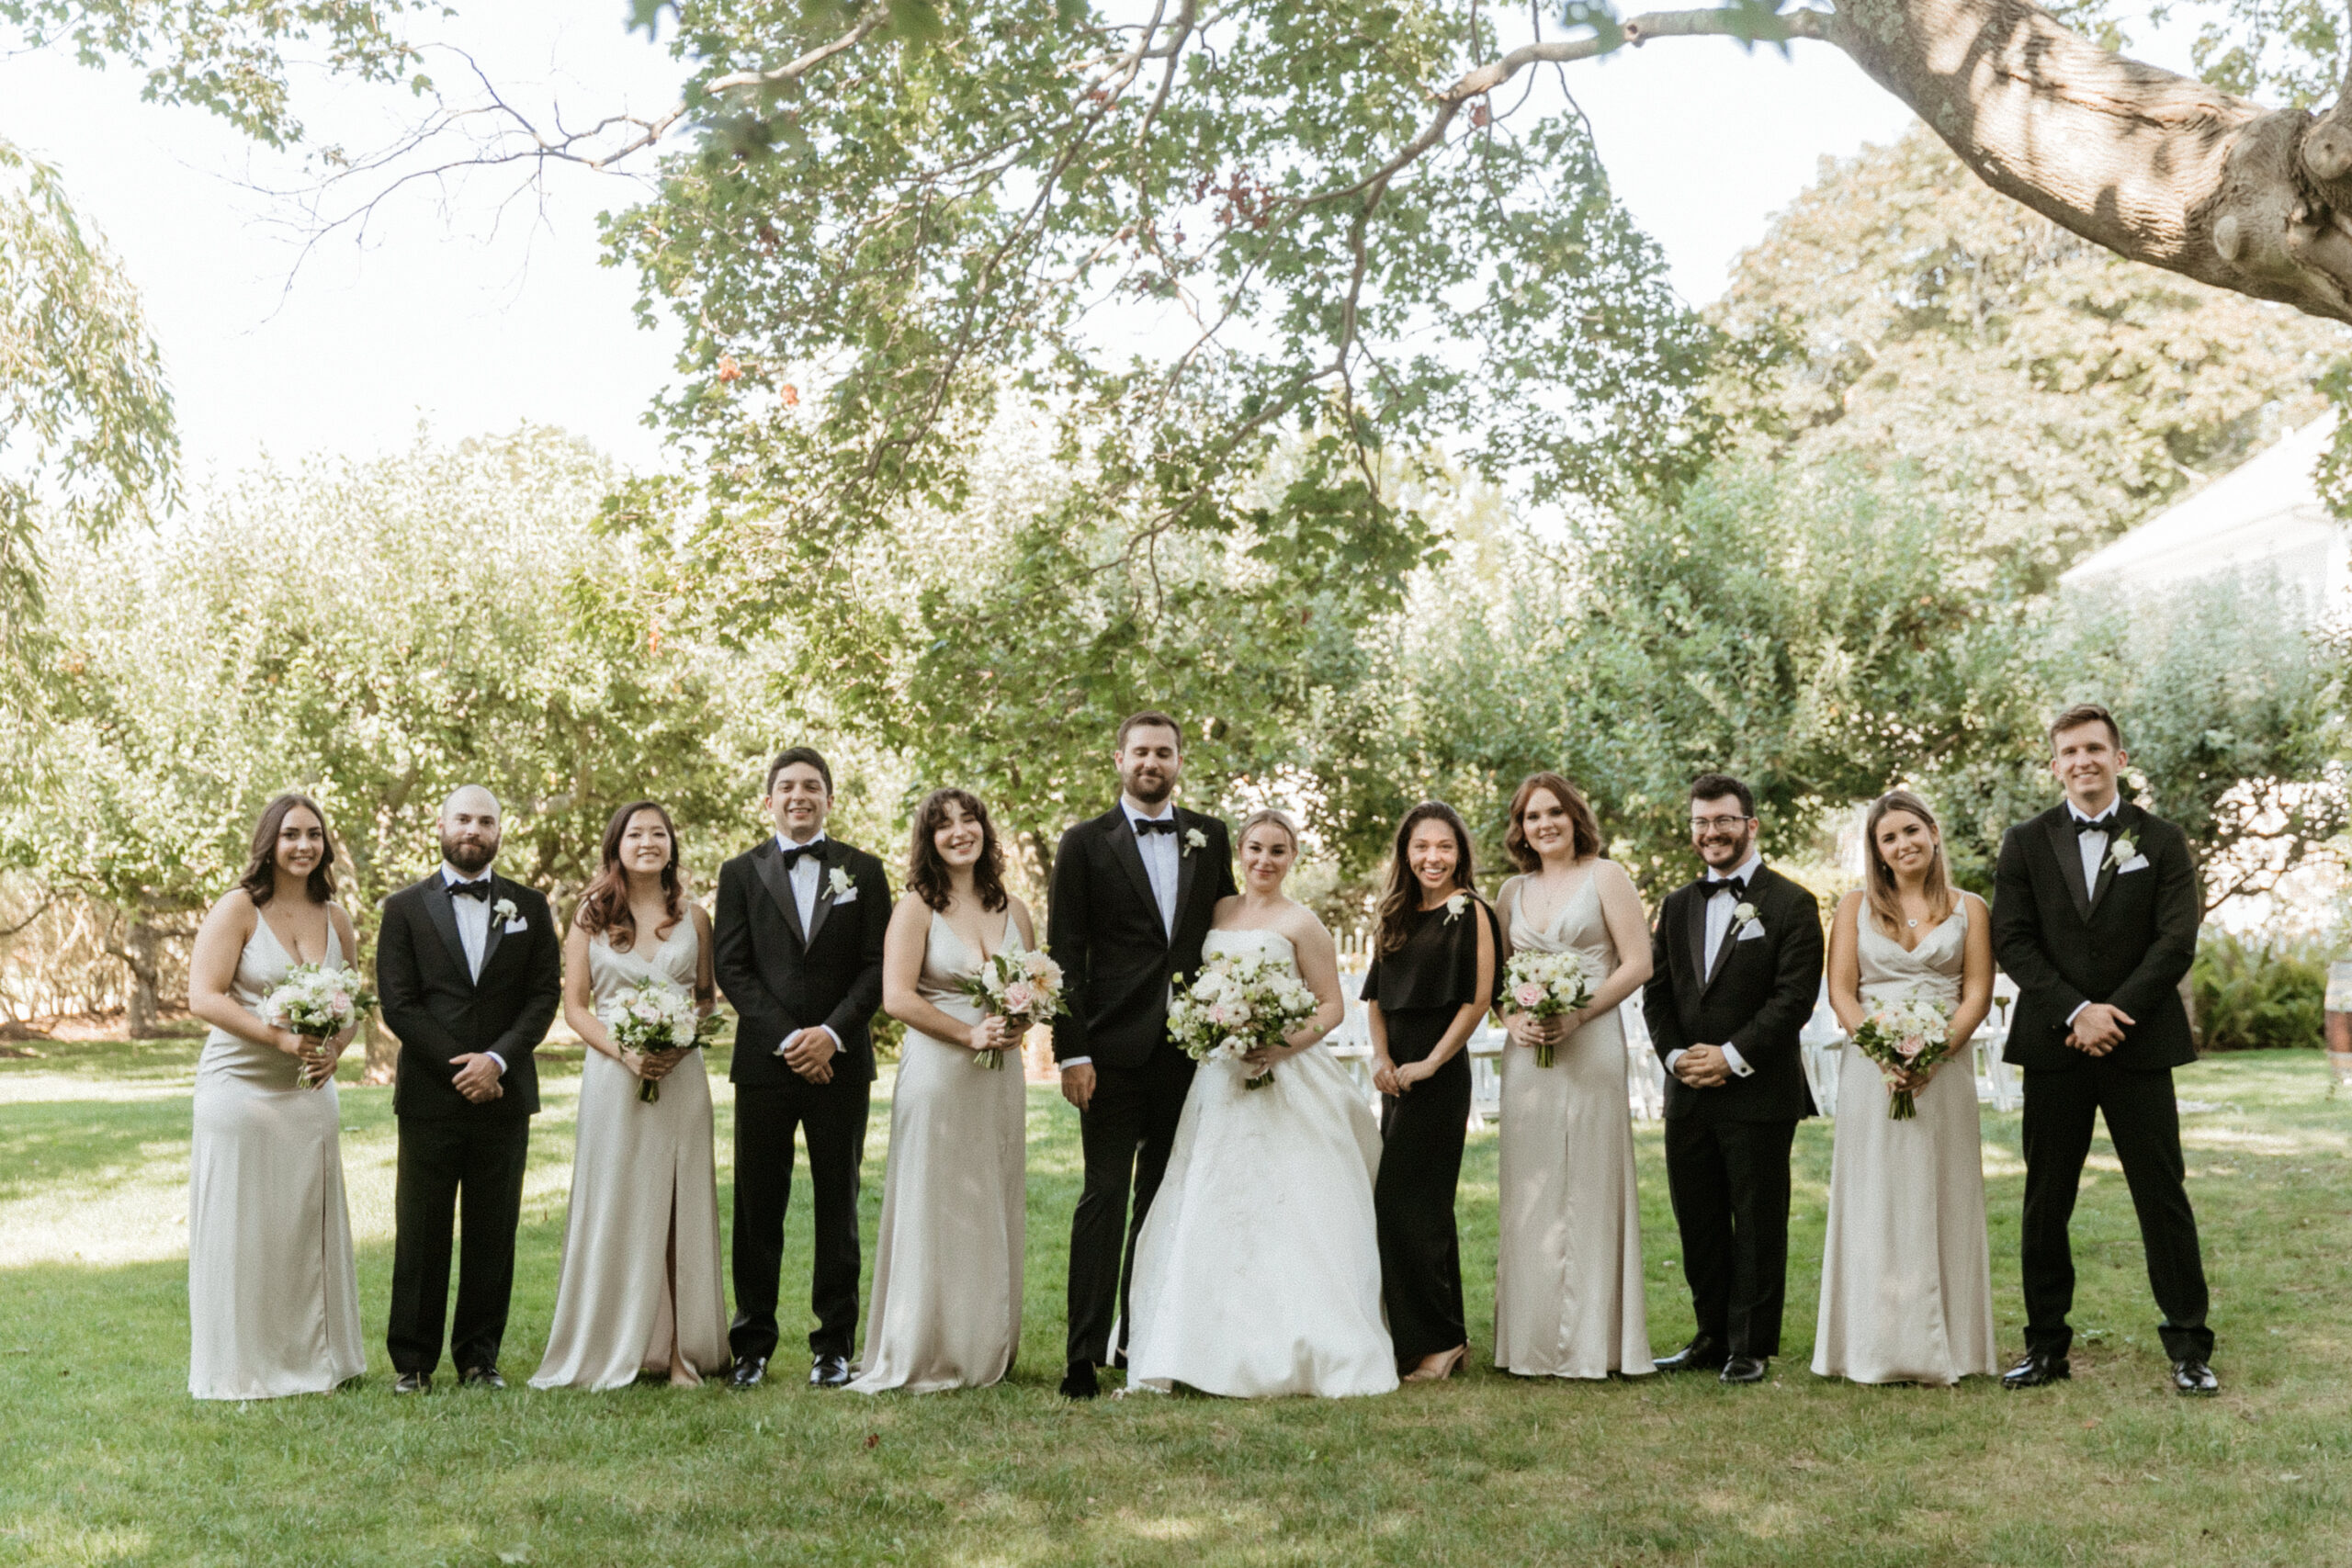 The whole wedding party pose together in the beautiful New York nature